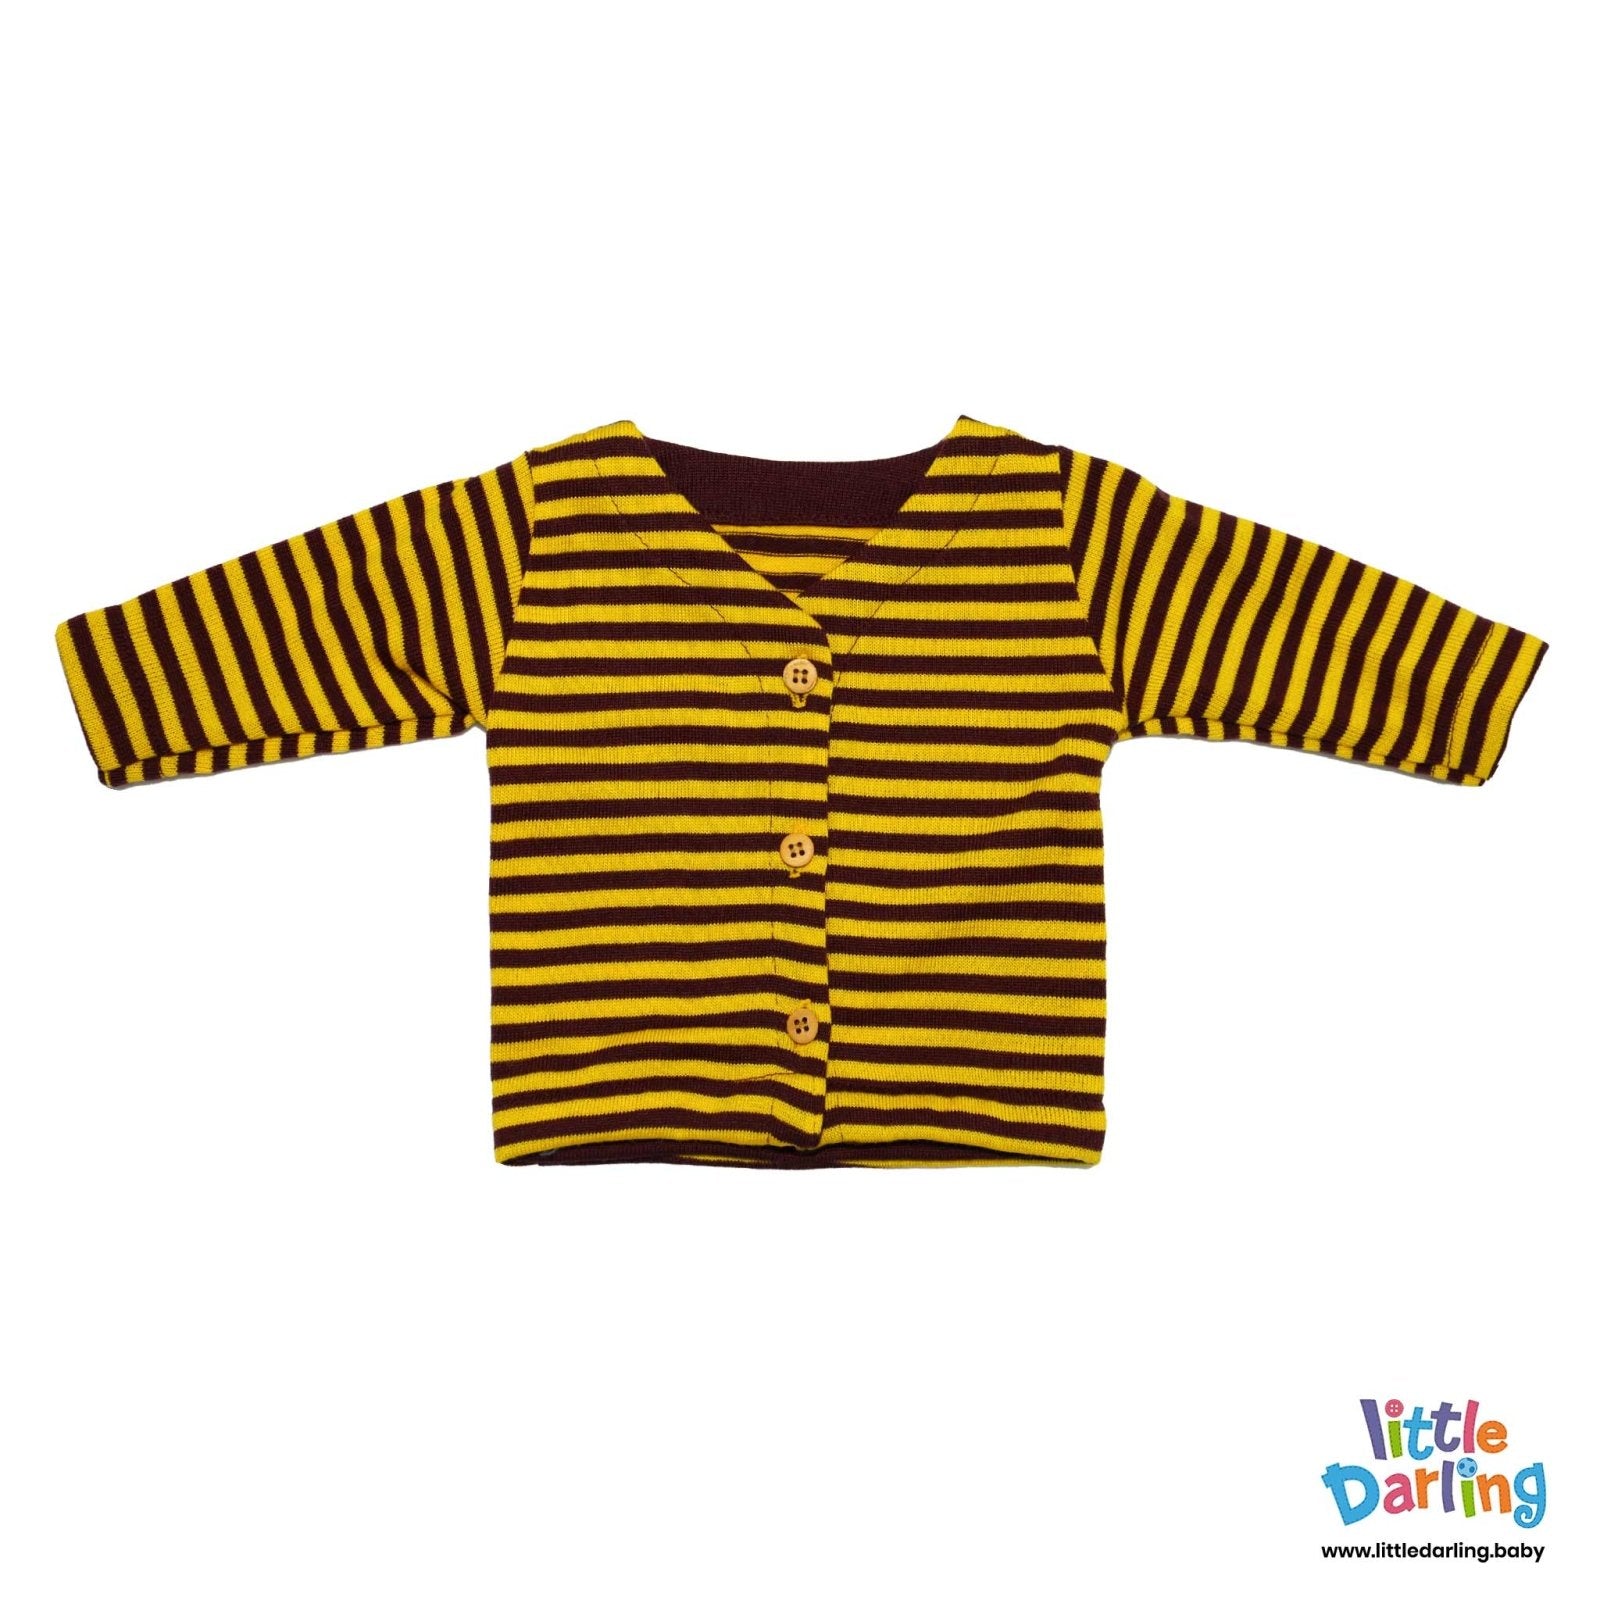 4 Pcs Woolen Gift Set Yellow & Brown Stripes by Little Darling